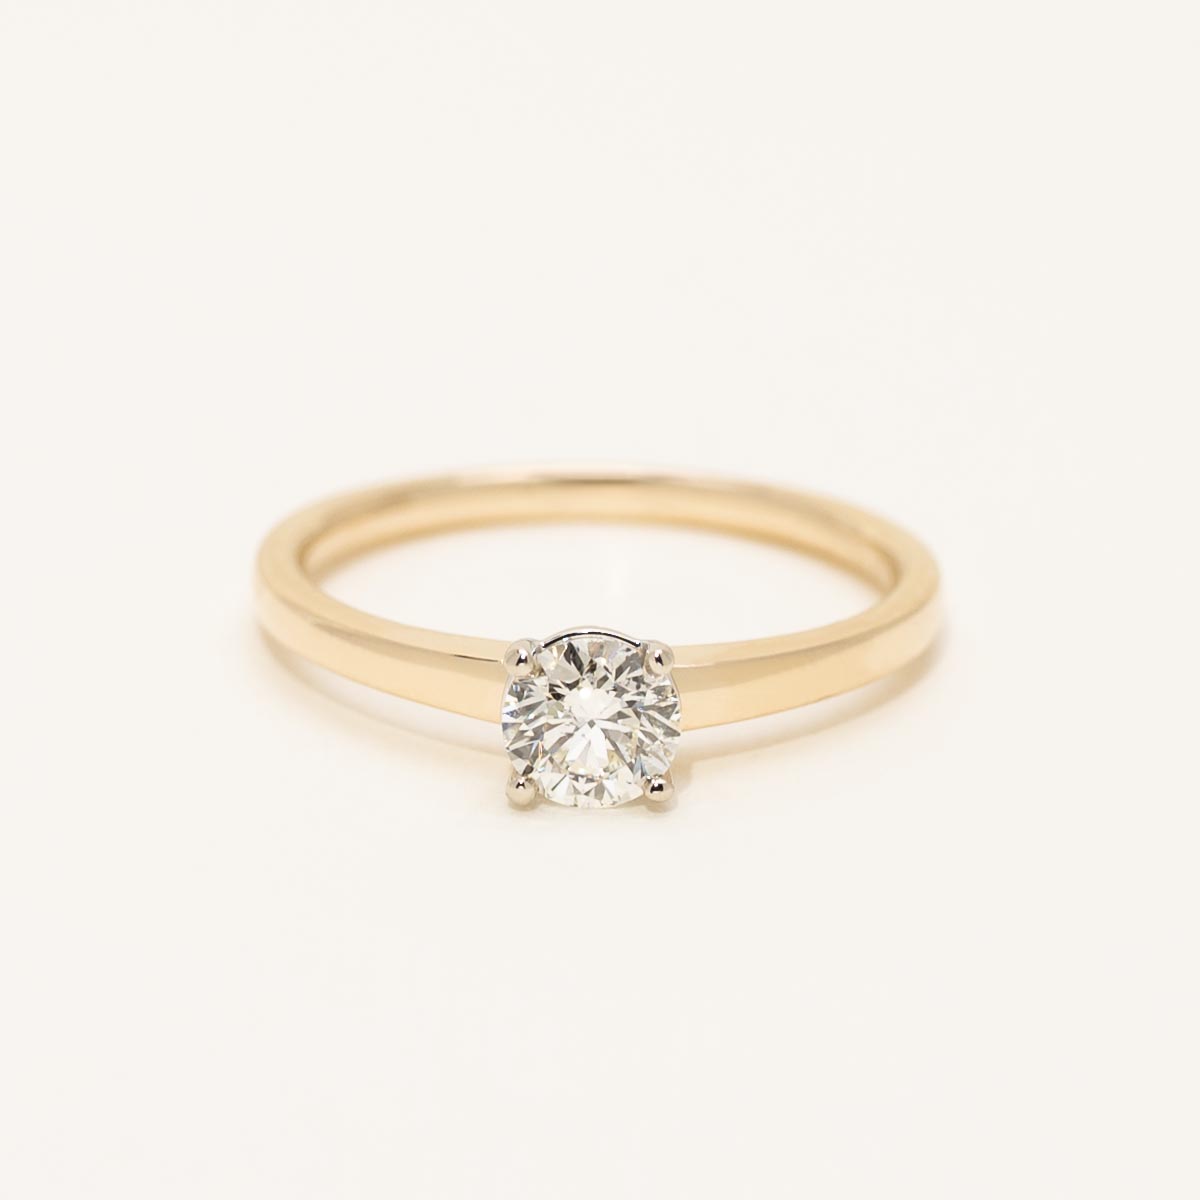 Diamond Solitaire Engagement Ring in 14kt Yellow Gold (1/2ct)